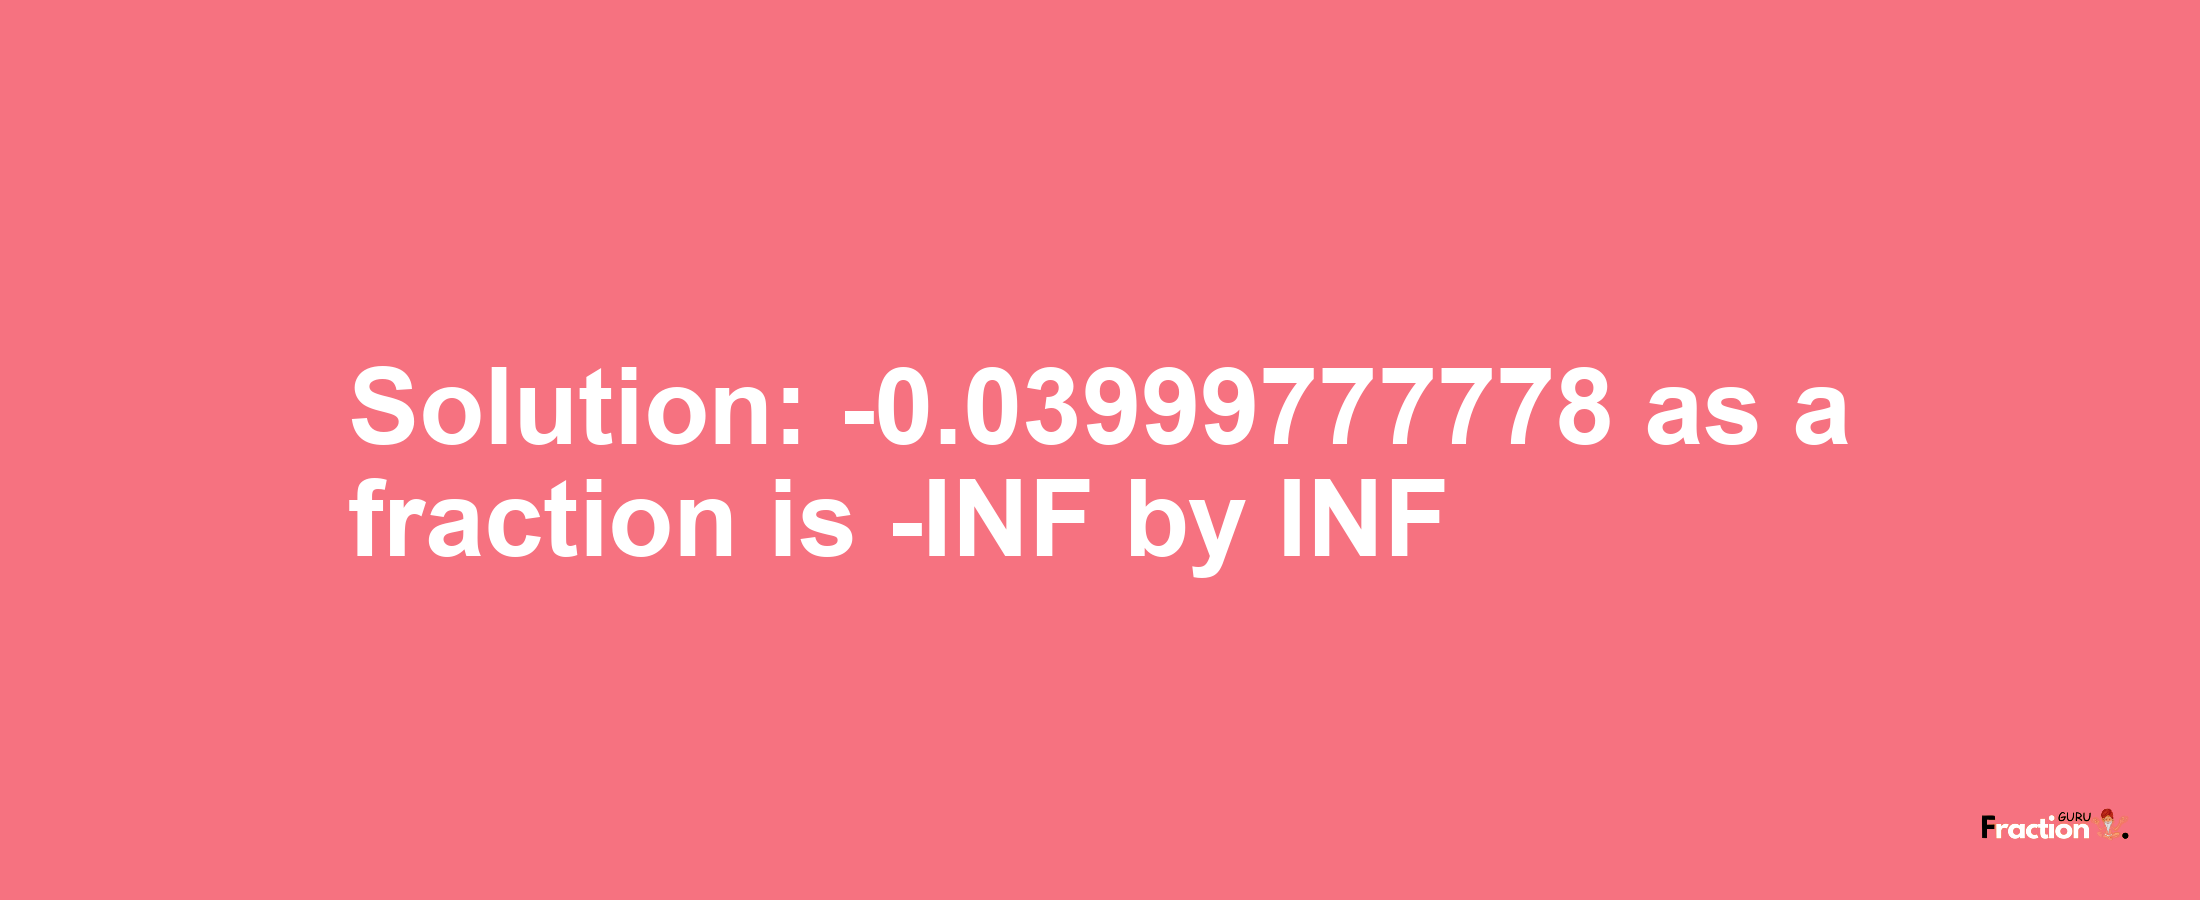 Solution:-0.03999777778 as a fraction is -INF/INF